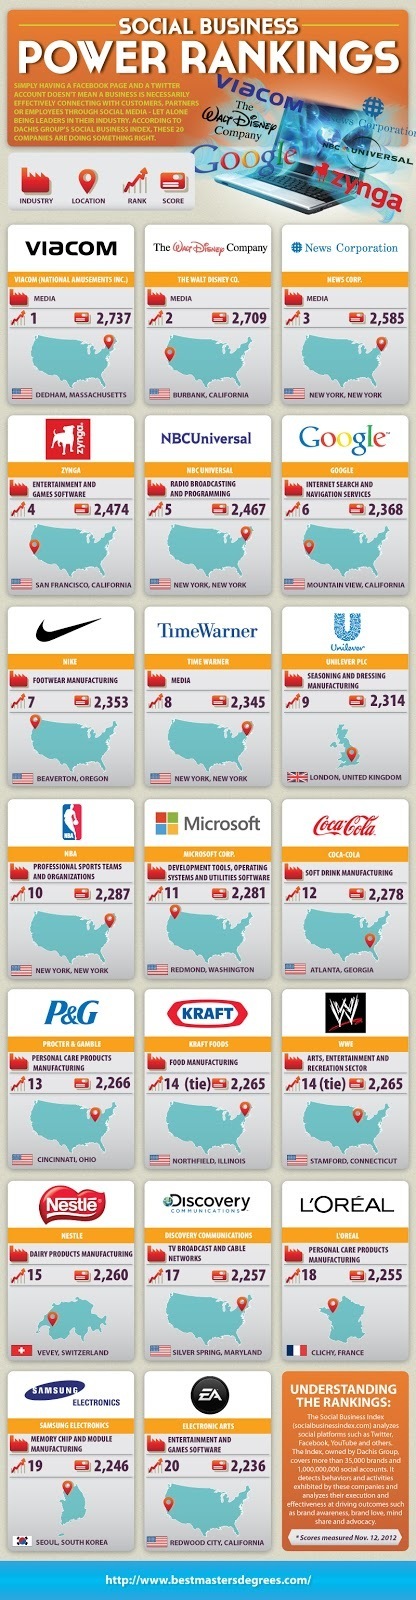 Biggest Social Brands in 2012 by Industry: #Infographic | Latest Social Media News | Scoop.it